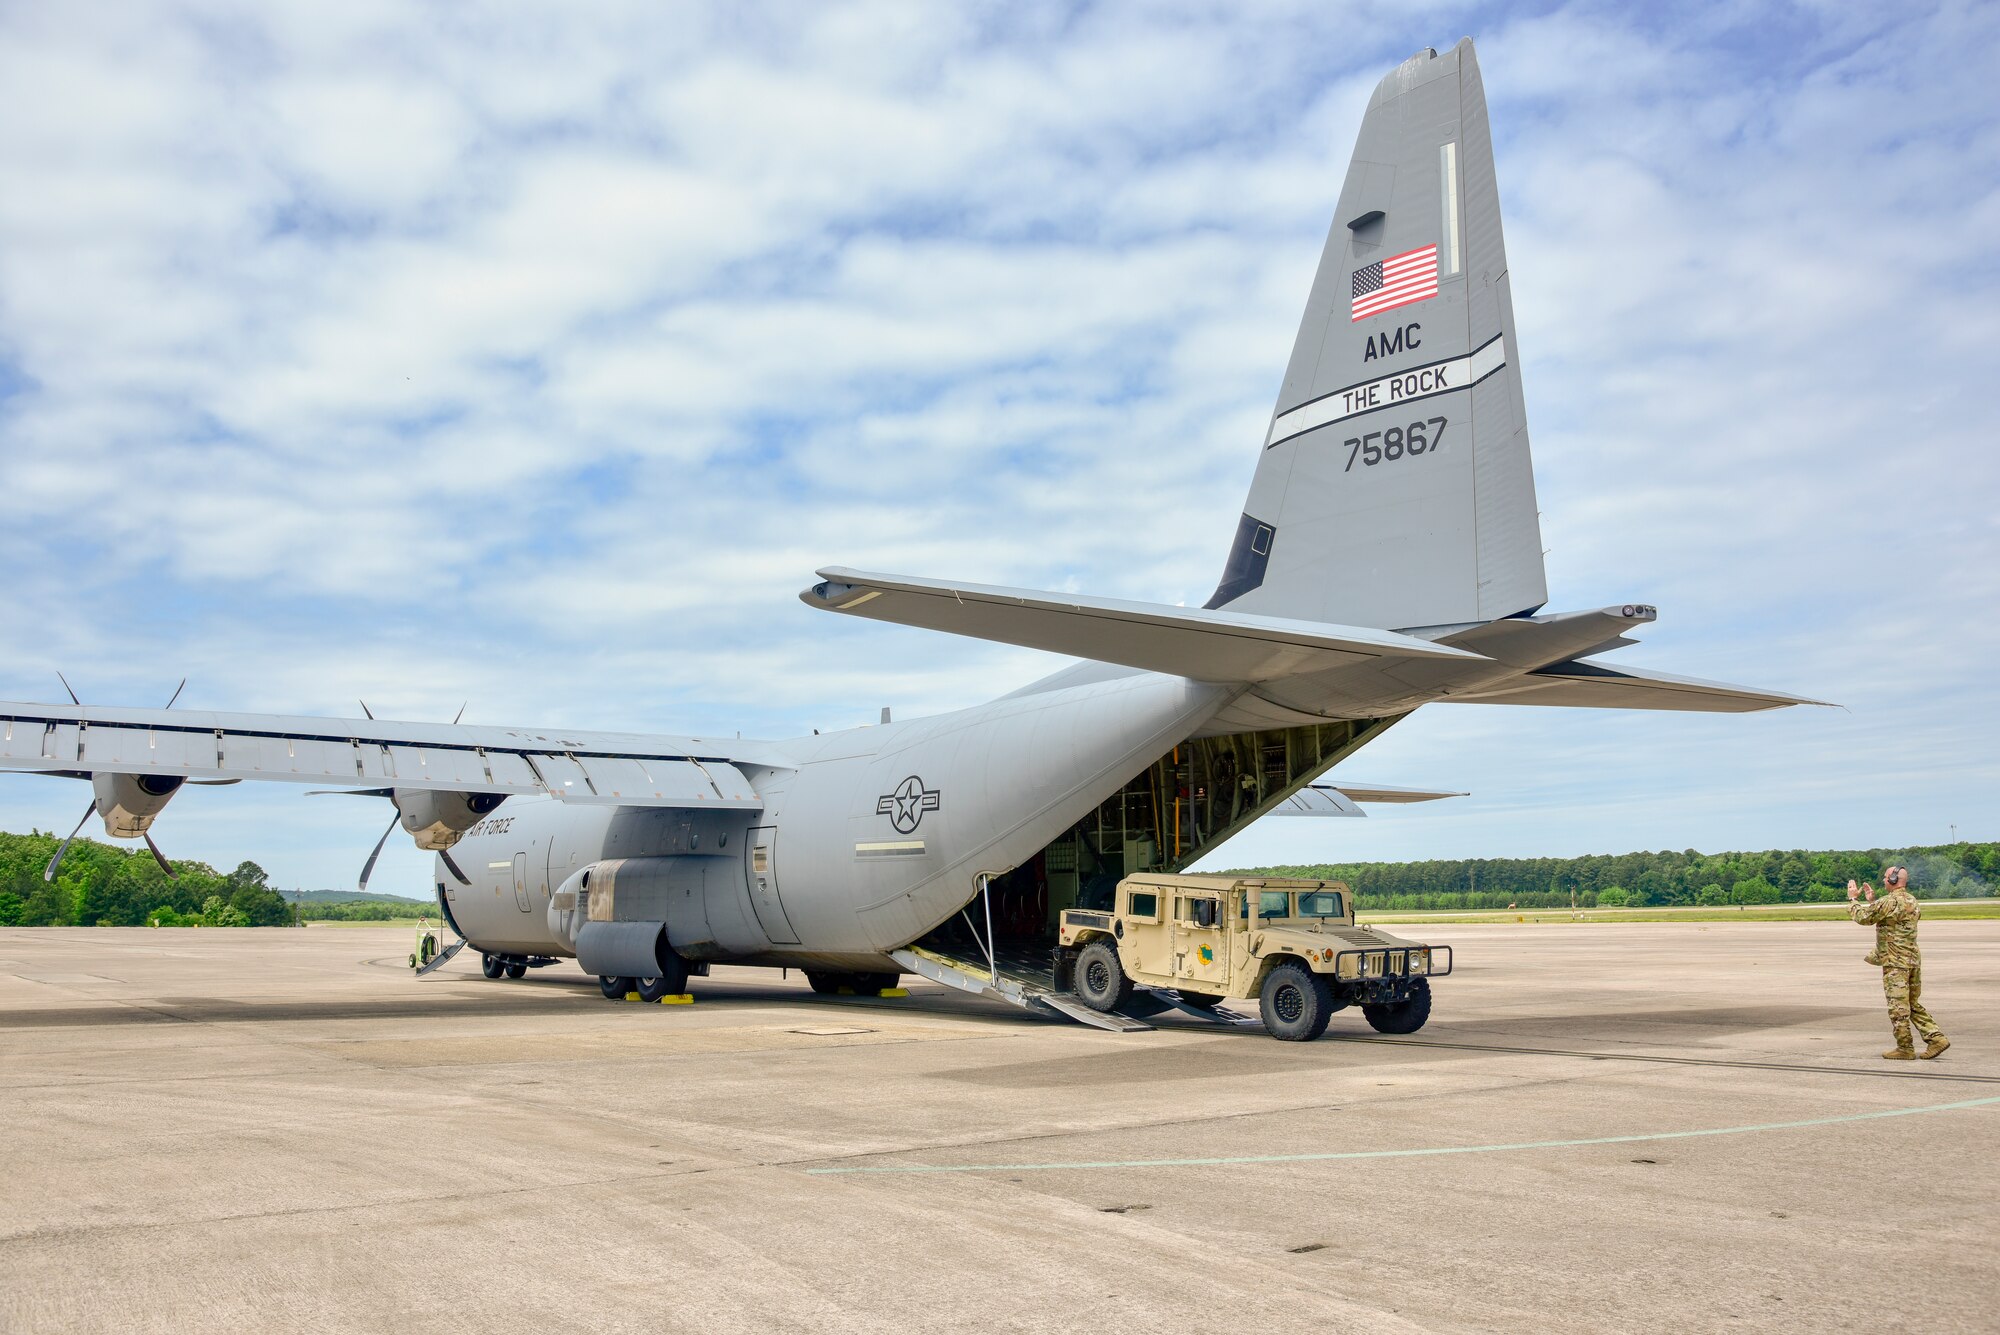 U.S. Air Force Reserve Senior Airman Richard Brewster, 327th Airlift Squadron loadmaster, loads a Humvee onto a C-130J Super Hercules at Little Rock Air Force Base, Arkansas, on May 12, 2021. The Air Force Reserve 327th Airlift Squadron provided agile combat support and cargo handling training opportunities to the 442d Fighter Wing during a training event. (U.S. Air Force photo by Senior Airman Kalee Sexton)